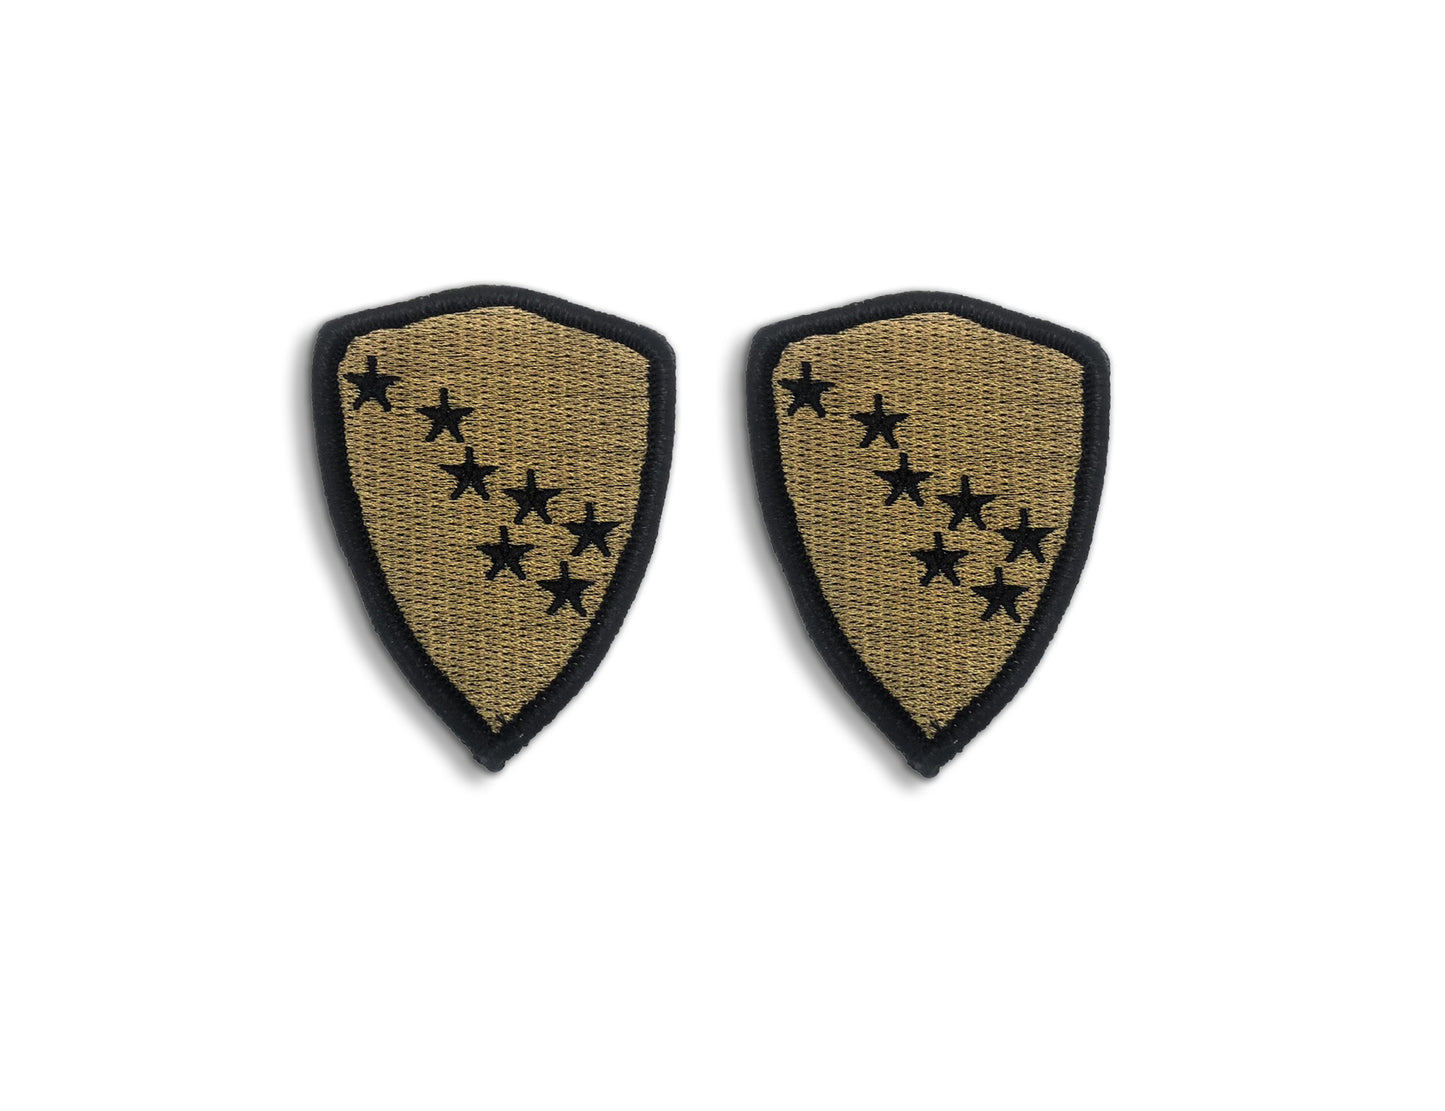 U.S. Army Alaska National Guard OCP Patch with Hook Fastener (pair)